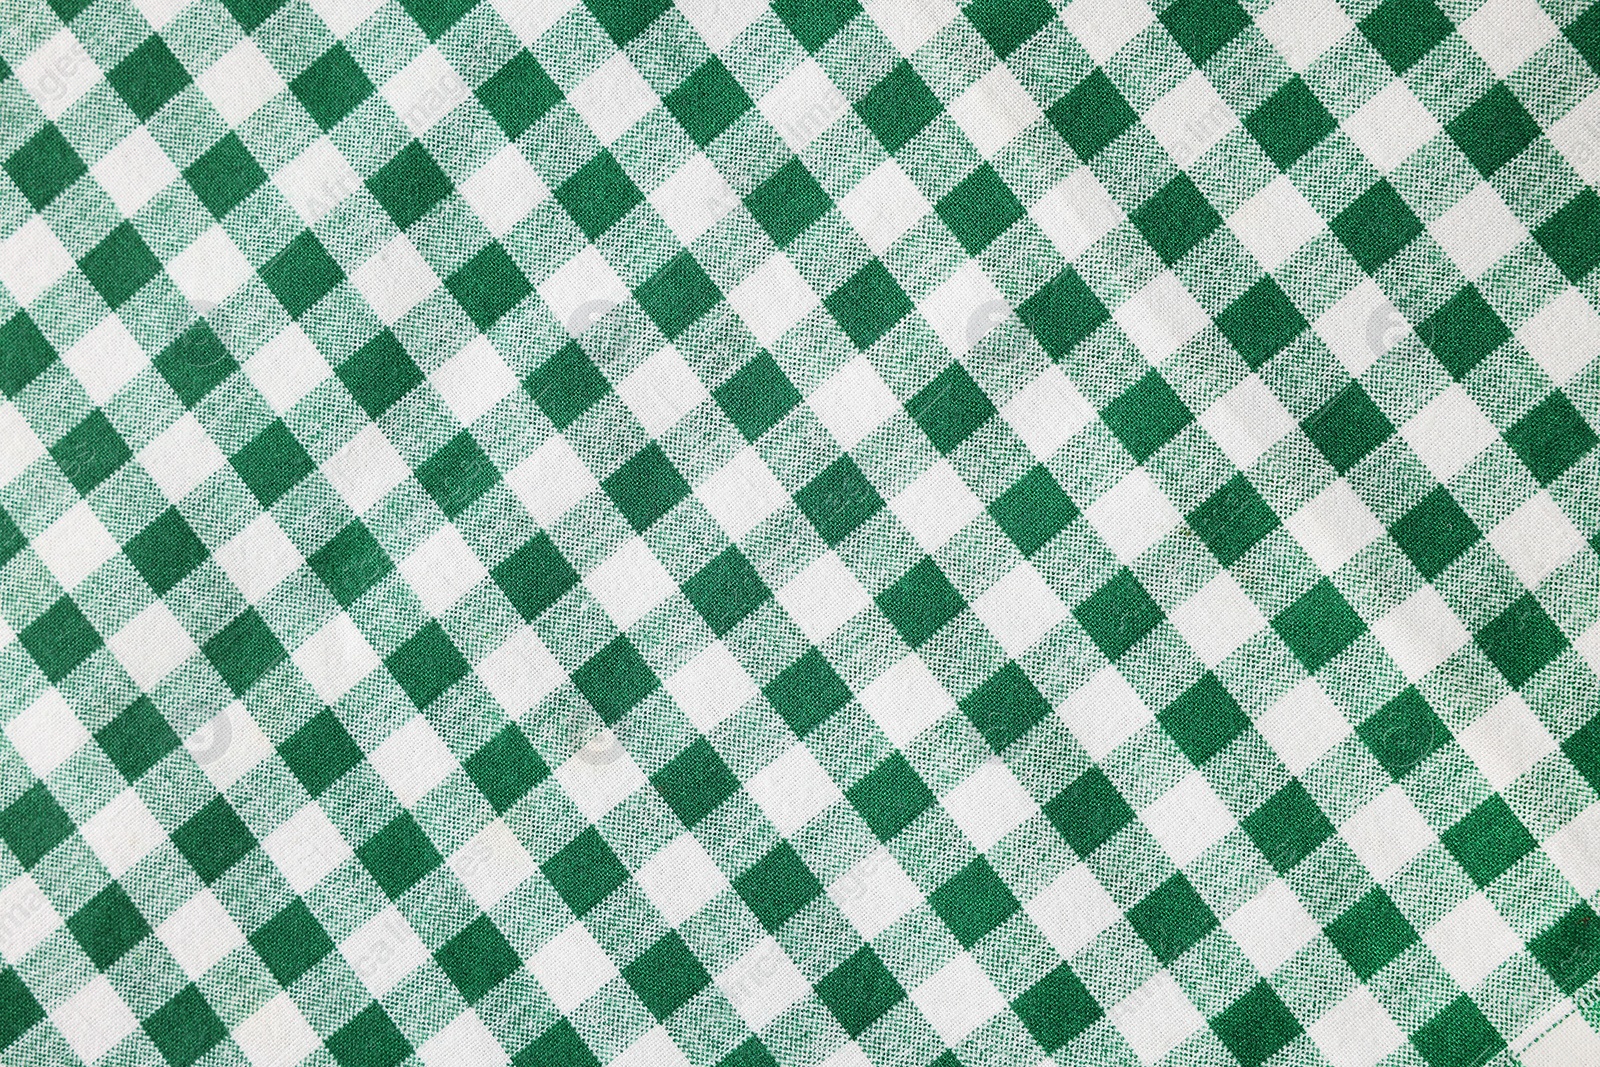 Photo of Green checkered tablecloth as background, top view